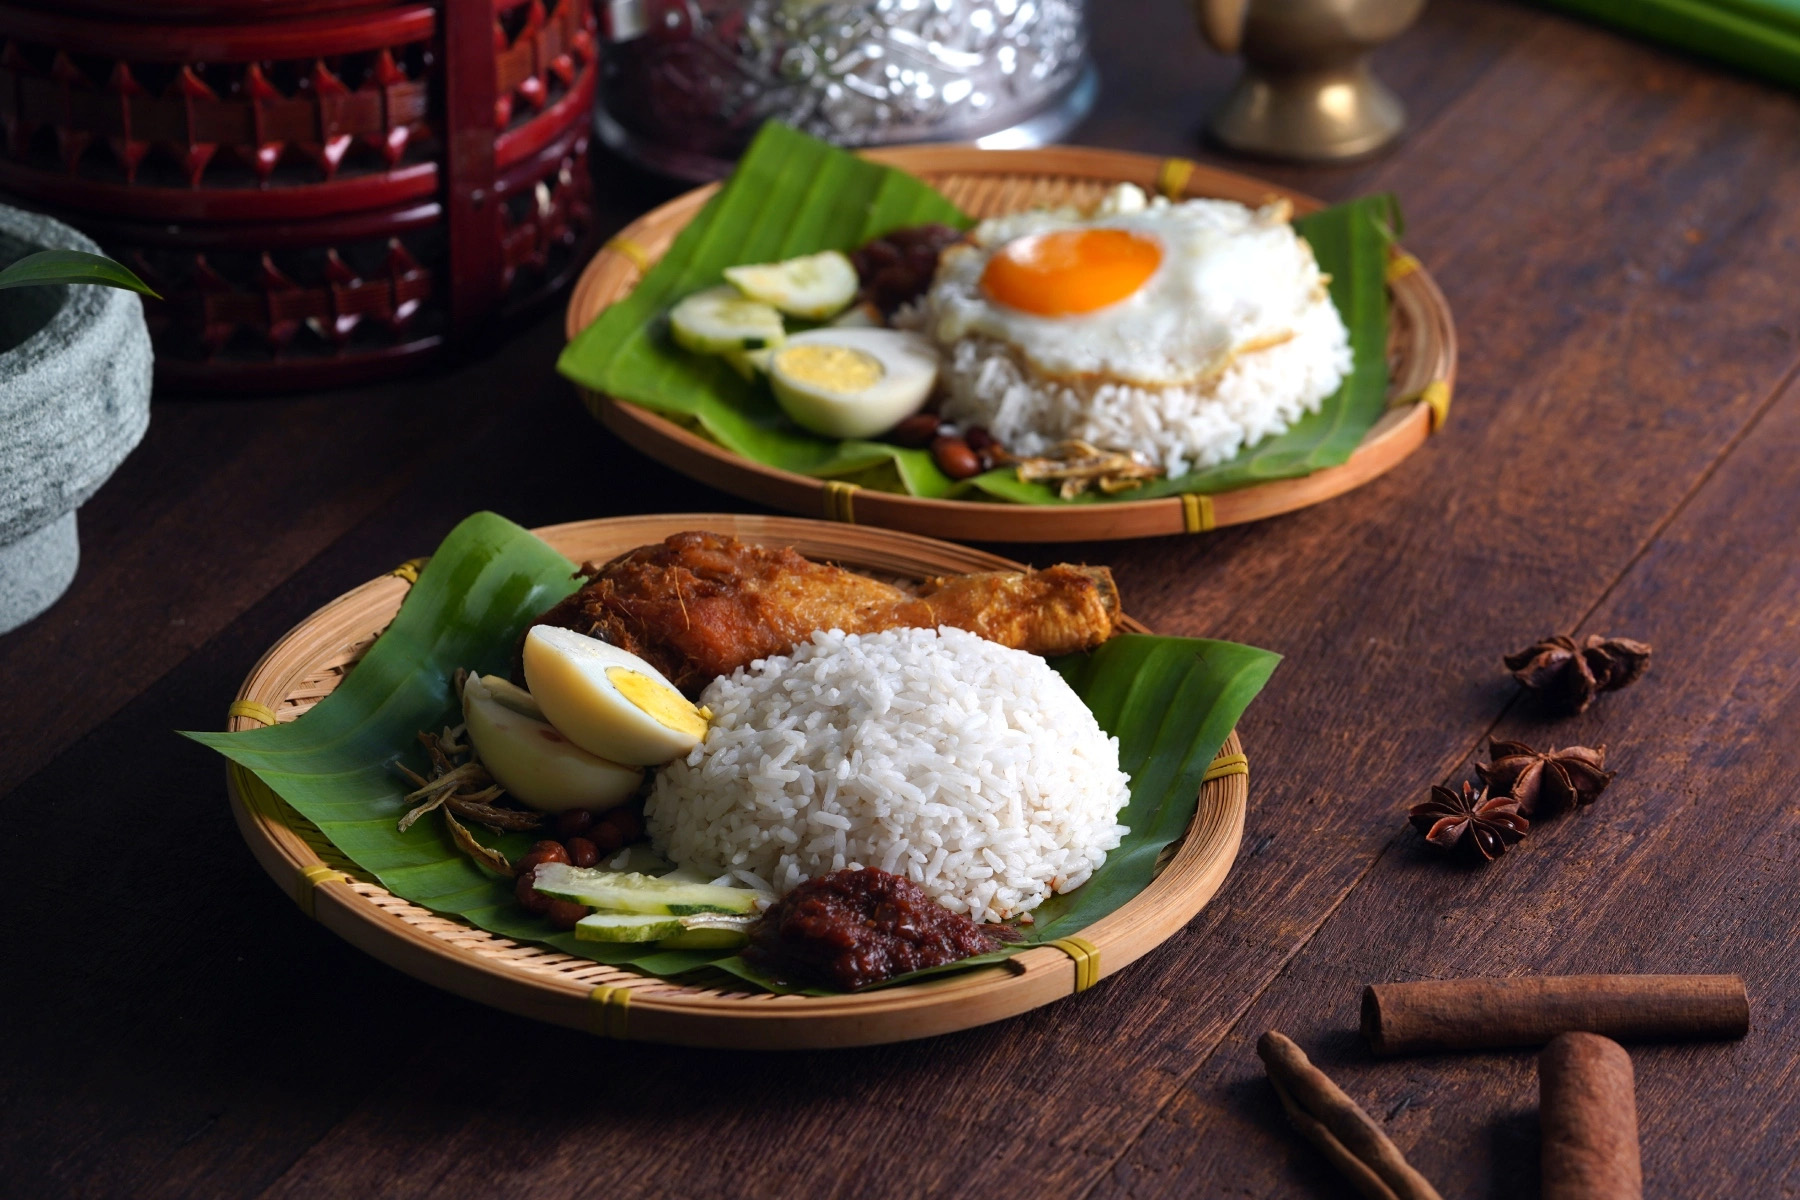 Two dishes of nasi lemak served on banana leaves. One is topped with an egg and the other isn't